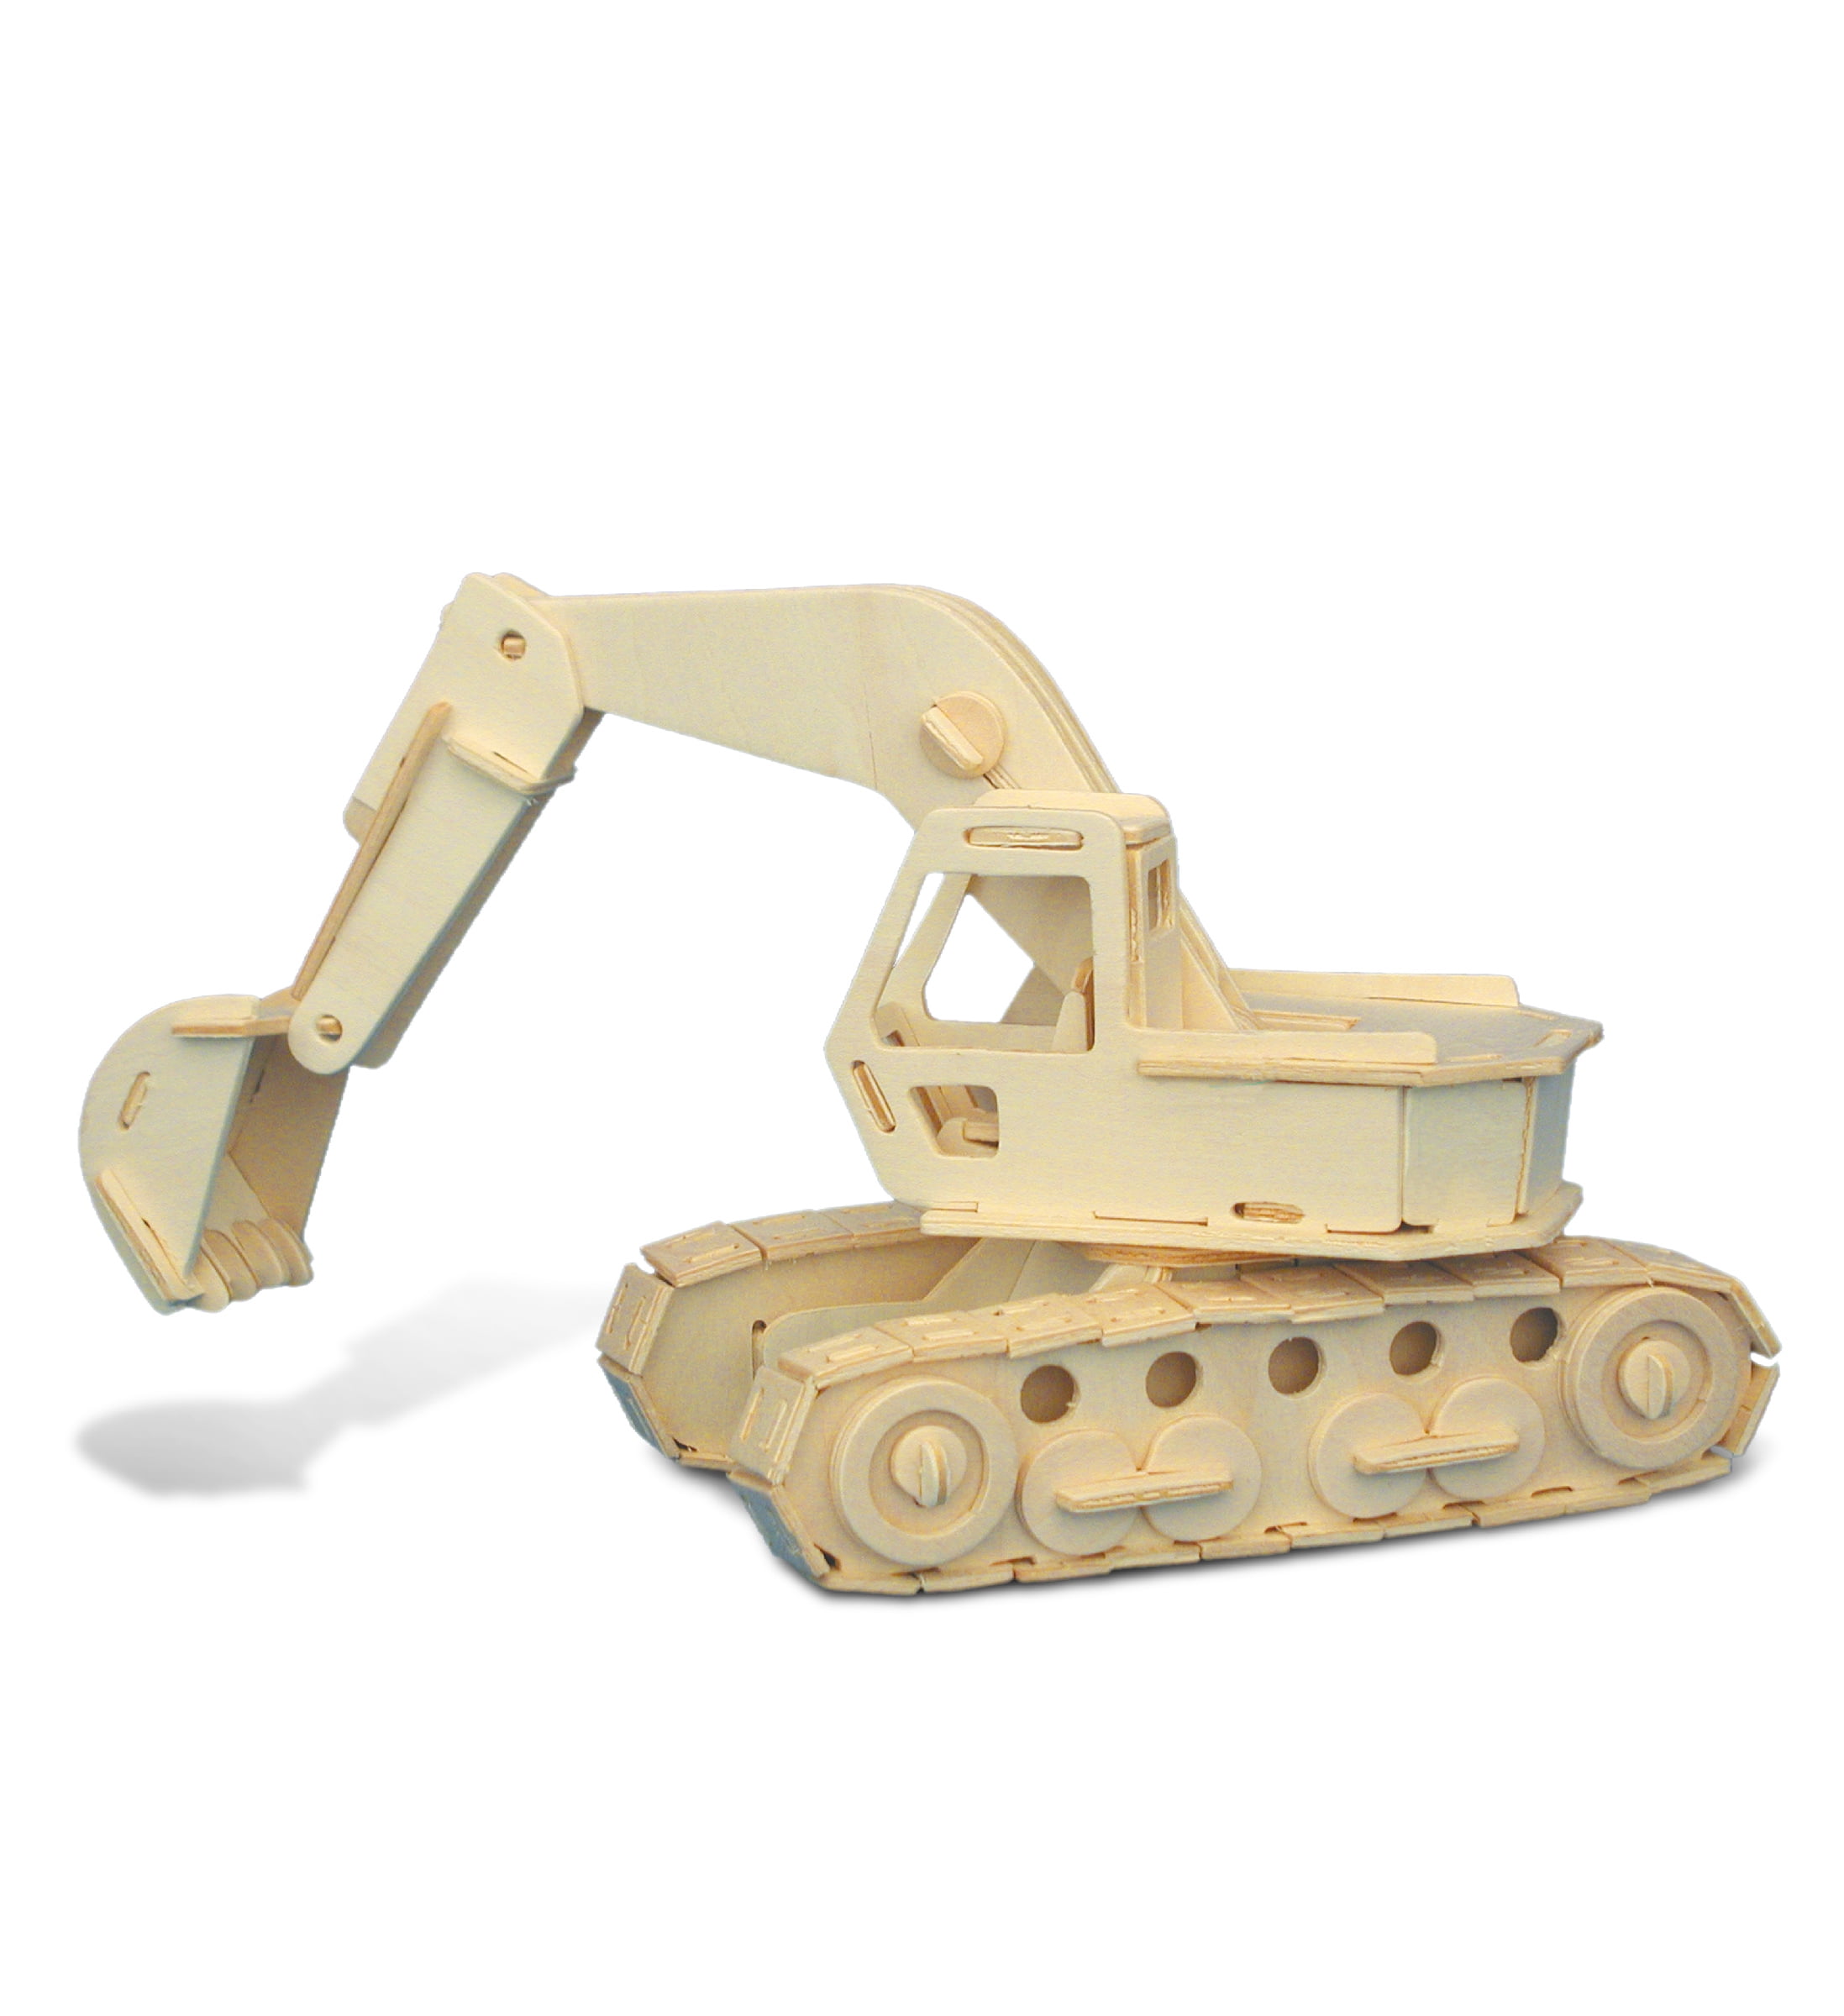 New Assembly DIY Education Toy 3D Wooden Model Puzzles of Bulldozer Vehicles 